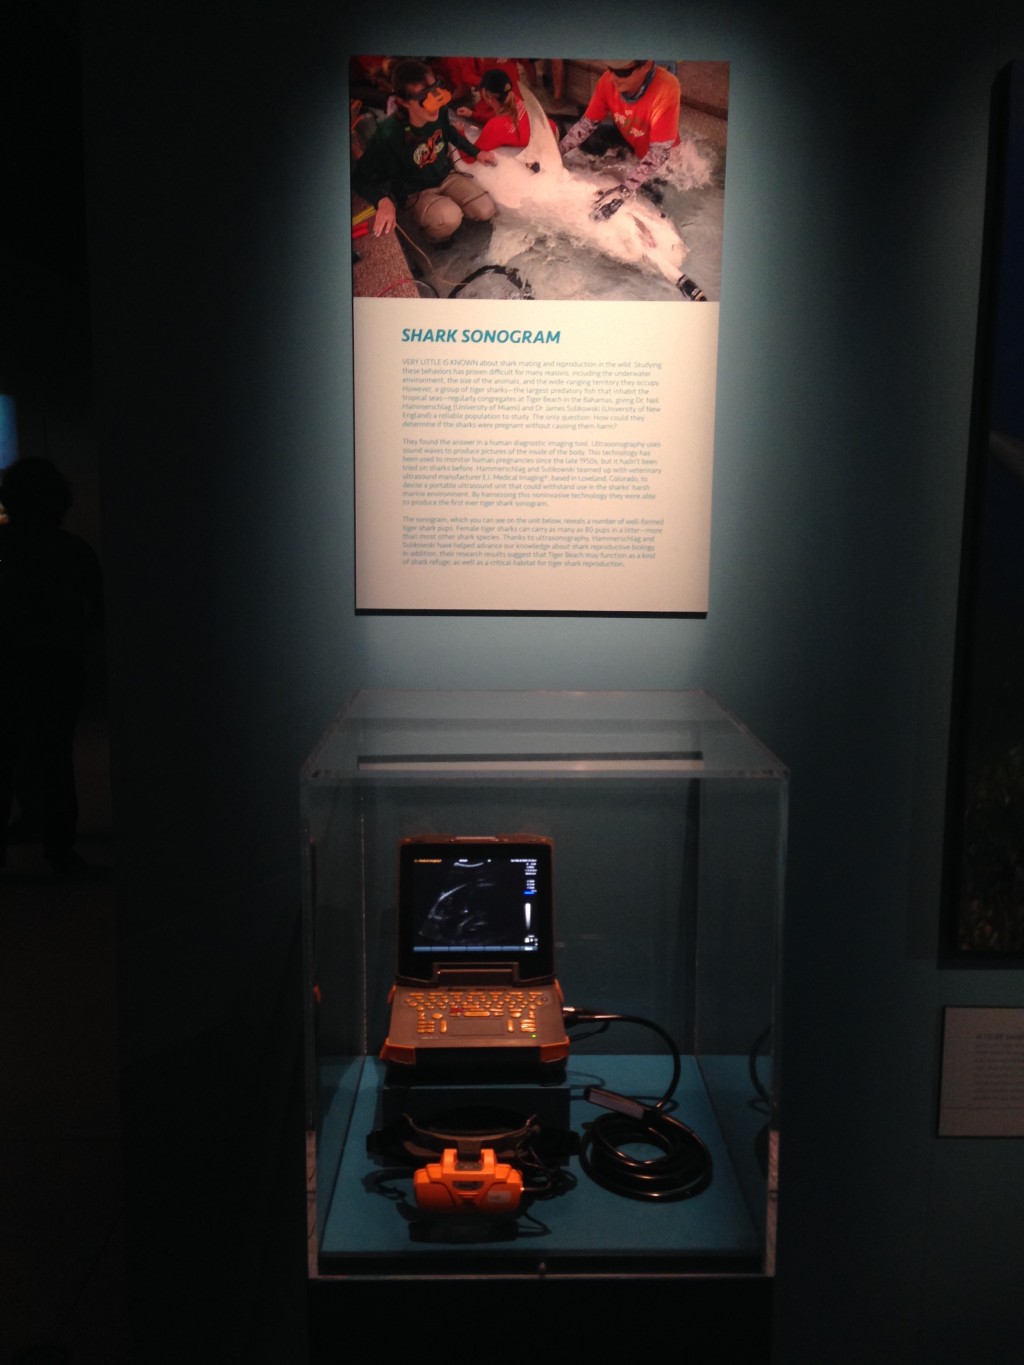 The exhibit includes a display of the ultrasound machine designed for sharks used by Sulikowski